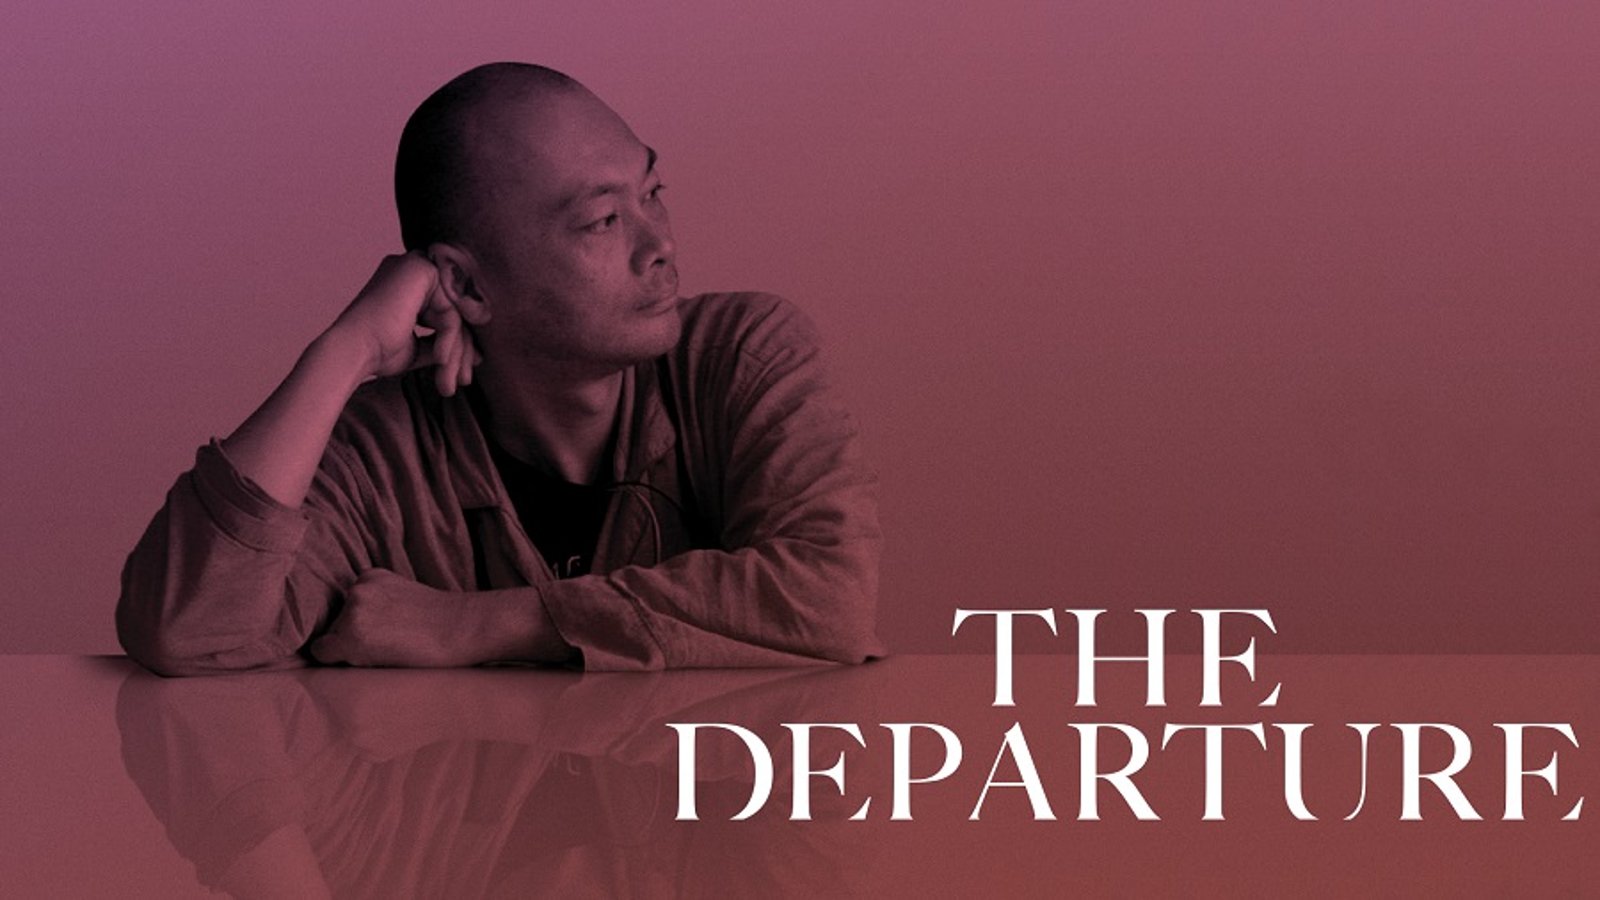 The Departure - The Life of an Unconventional Monk